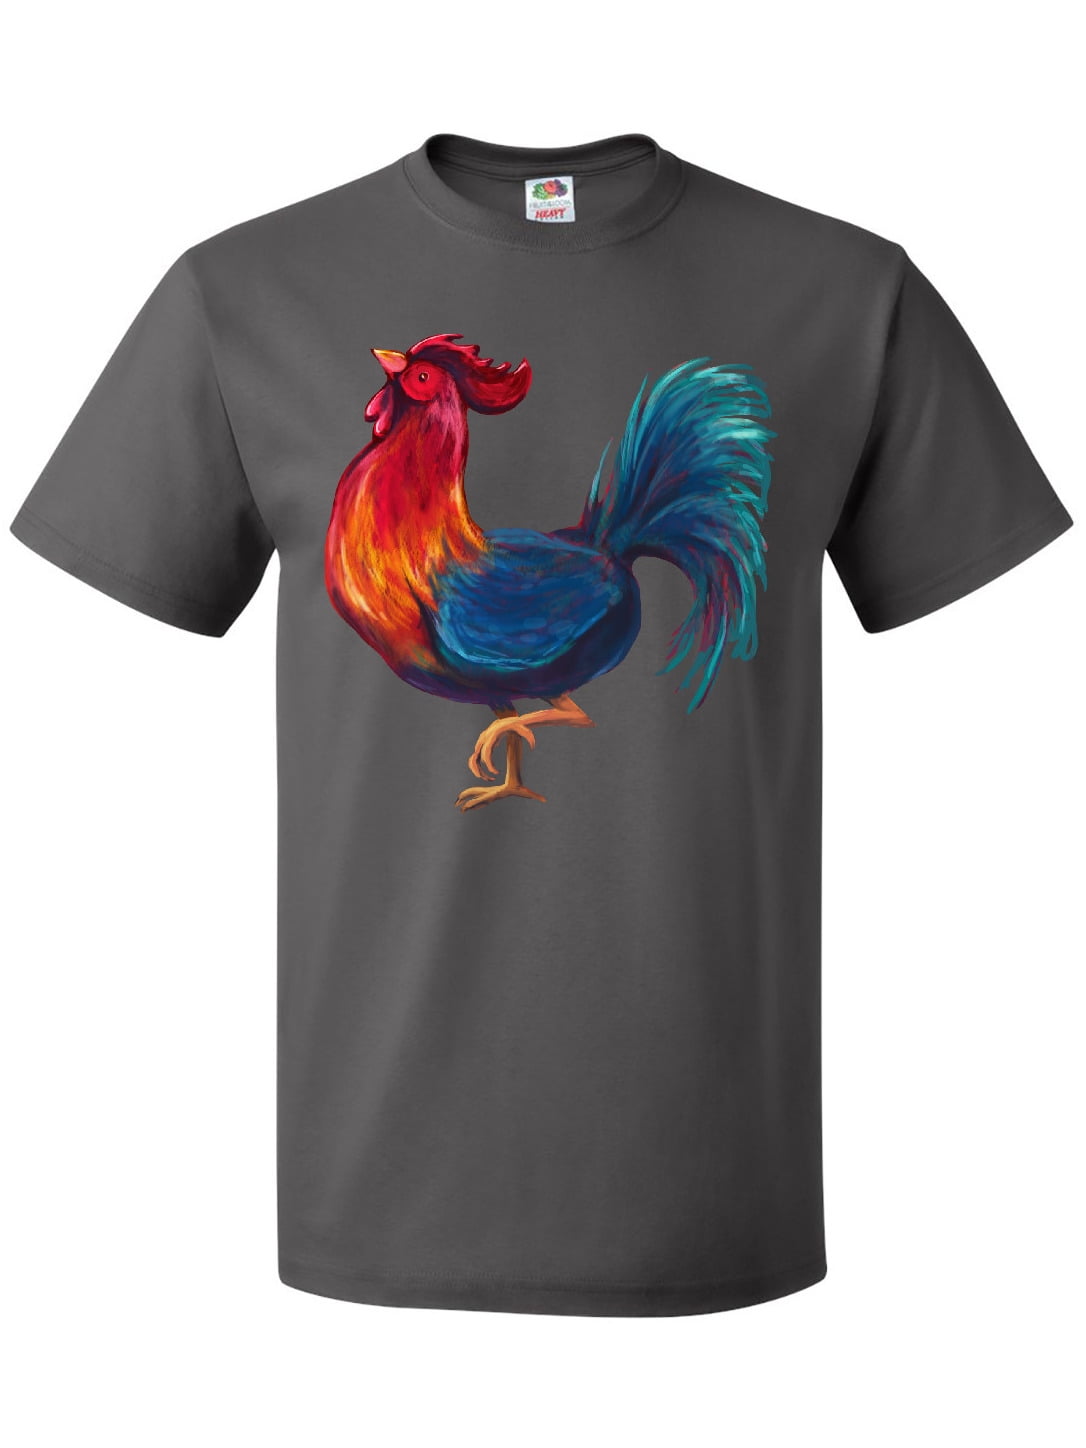 Rooster Kids T-shirt Gift Cock a Doodle Farm Sriracha Baby Toddler Youth Tee 